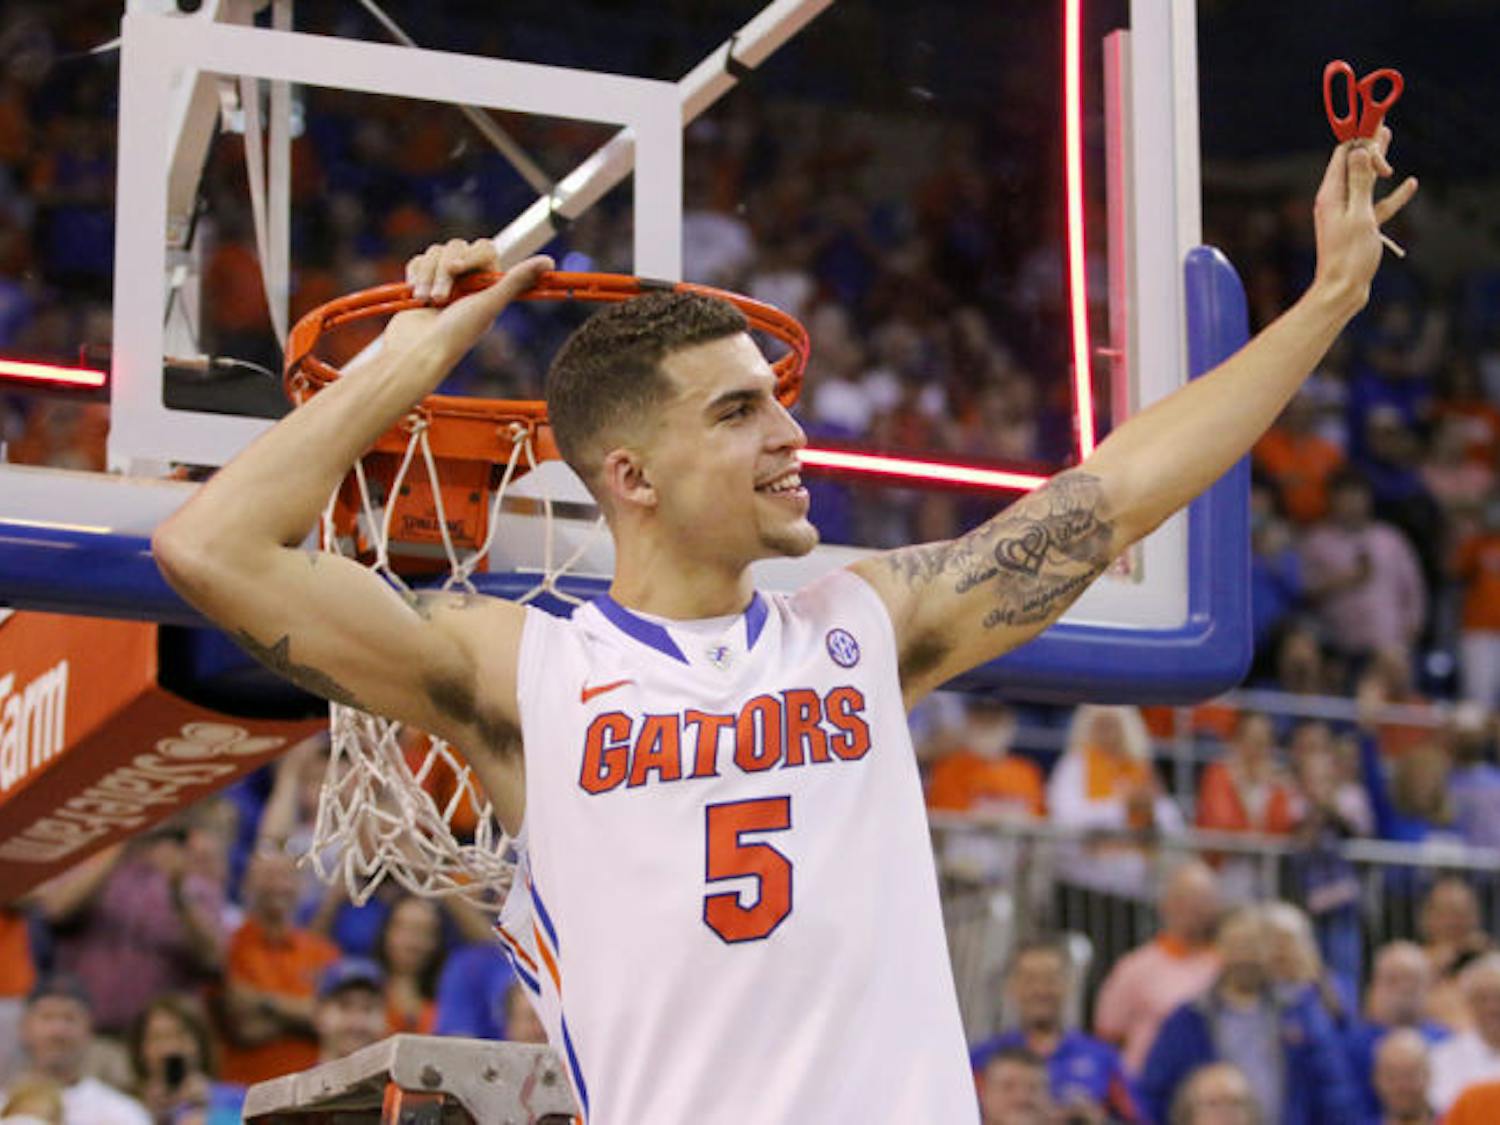 Scottie Wilbekin cuts down the net after Florida’s 84-65 win against Kentucky on Saturday in the O’Connell Center.